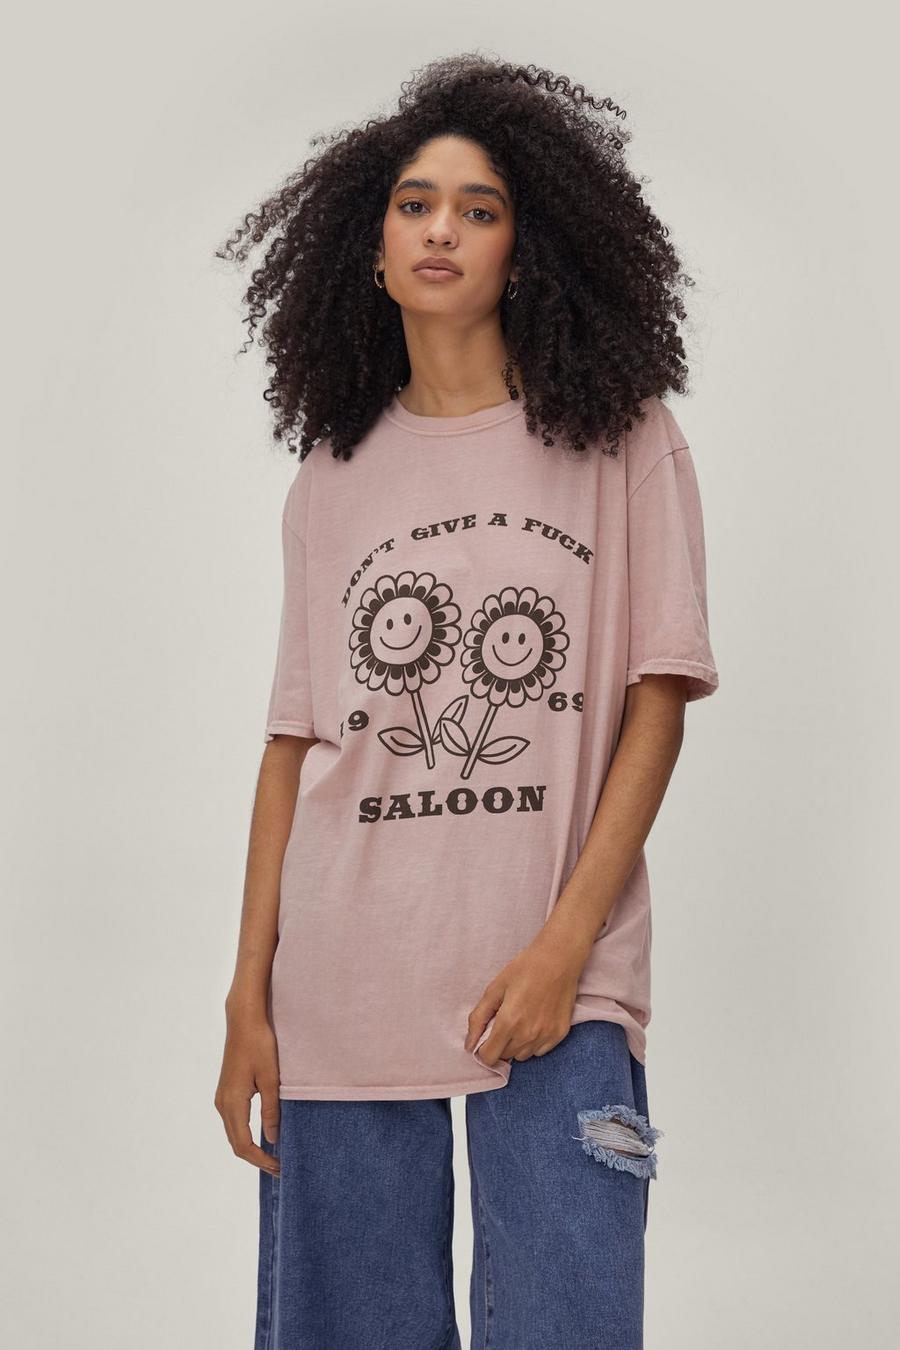 Don't Give A Fuck Saloon Graphic T-Shirt